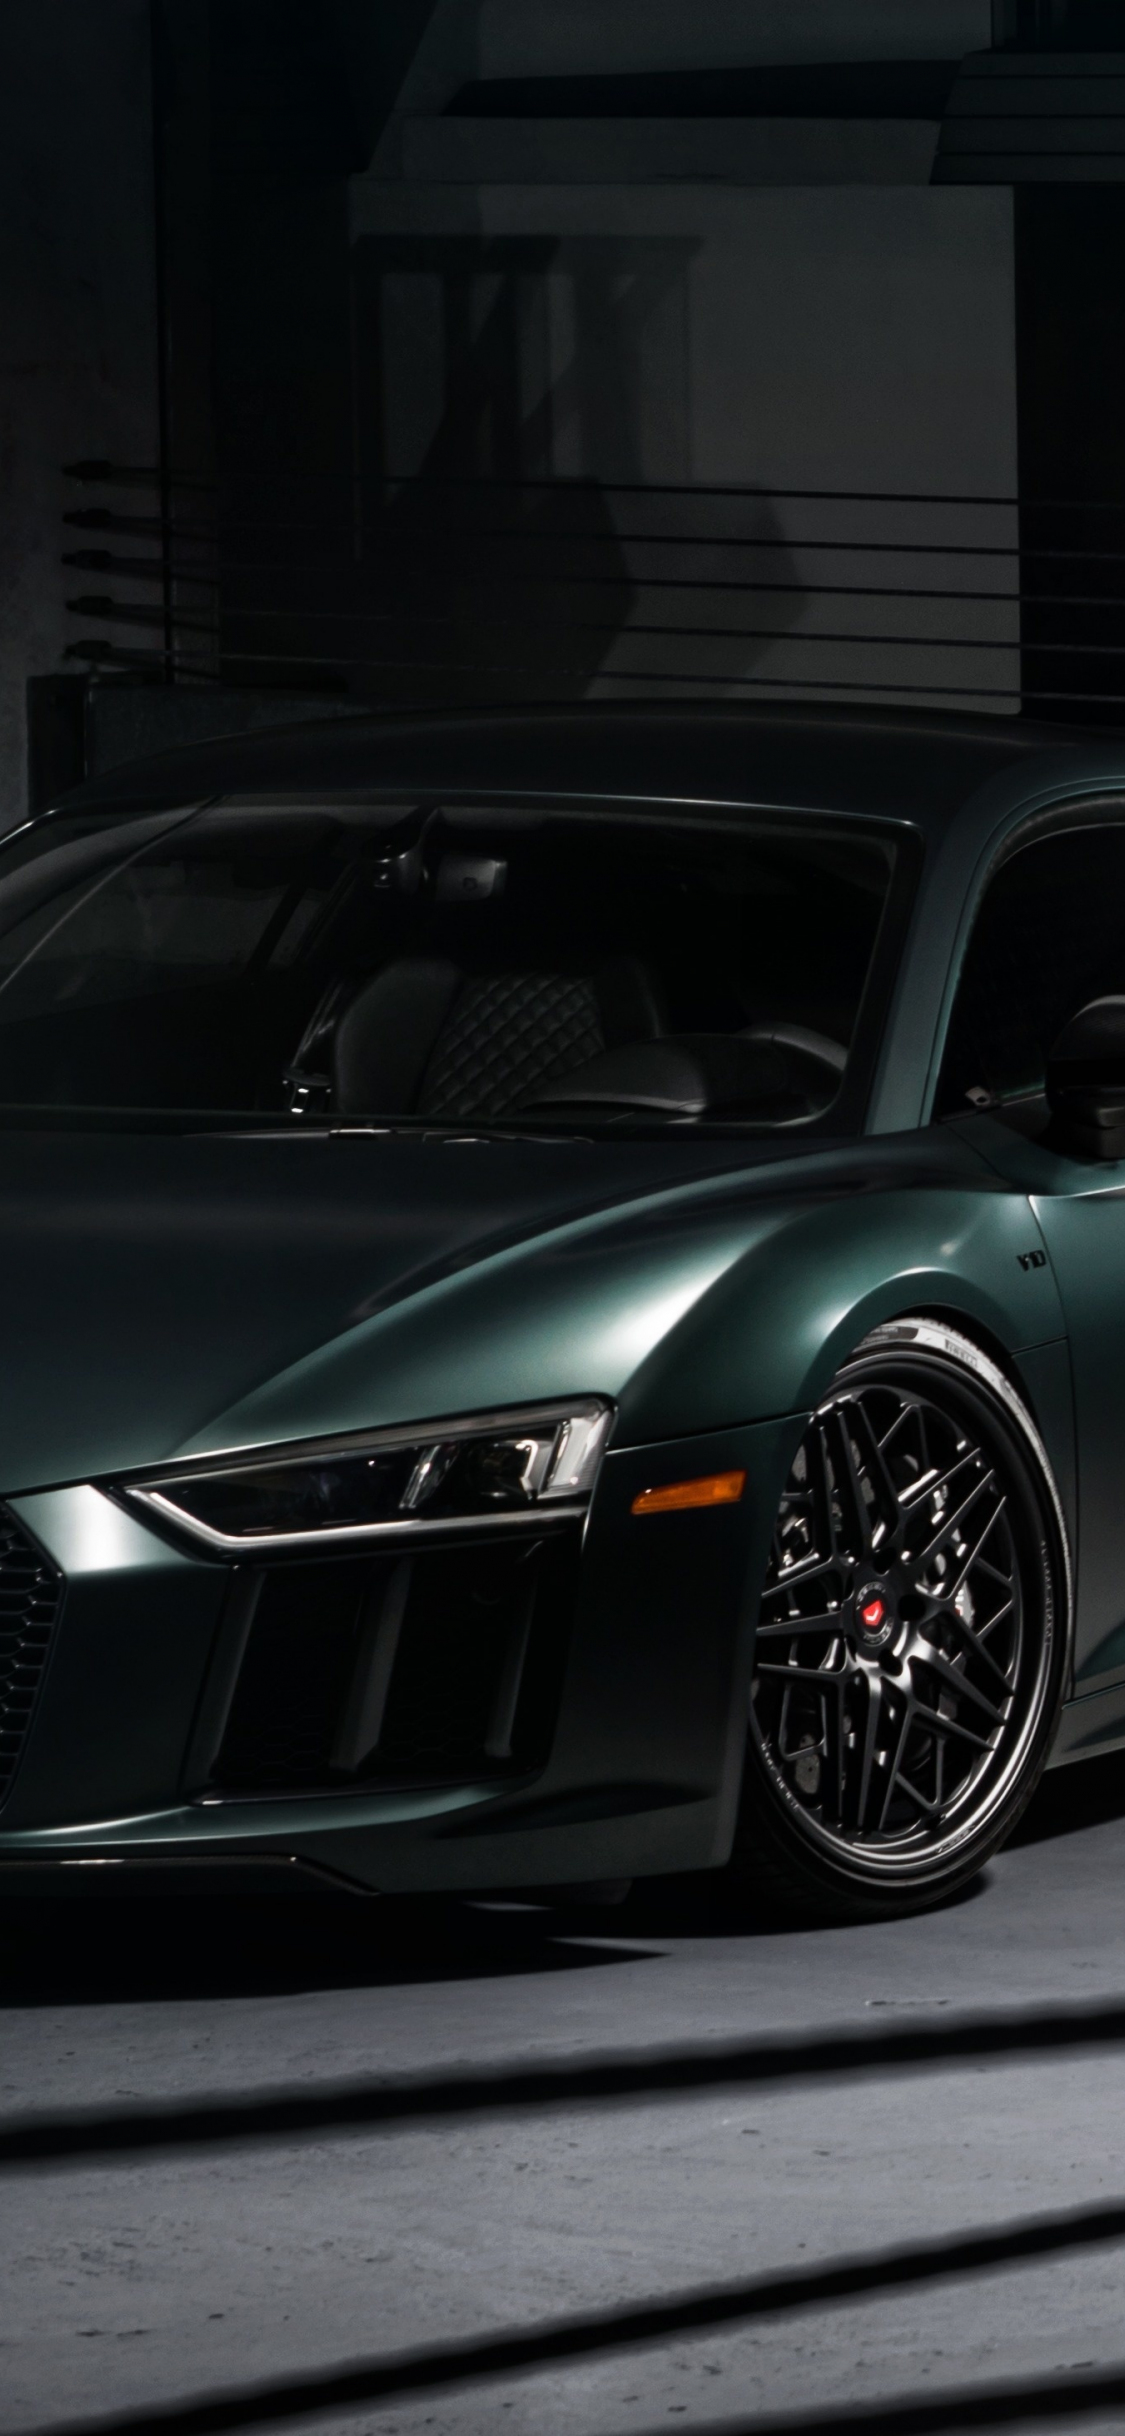 Audi R8 Wallpaper Android